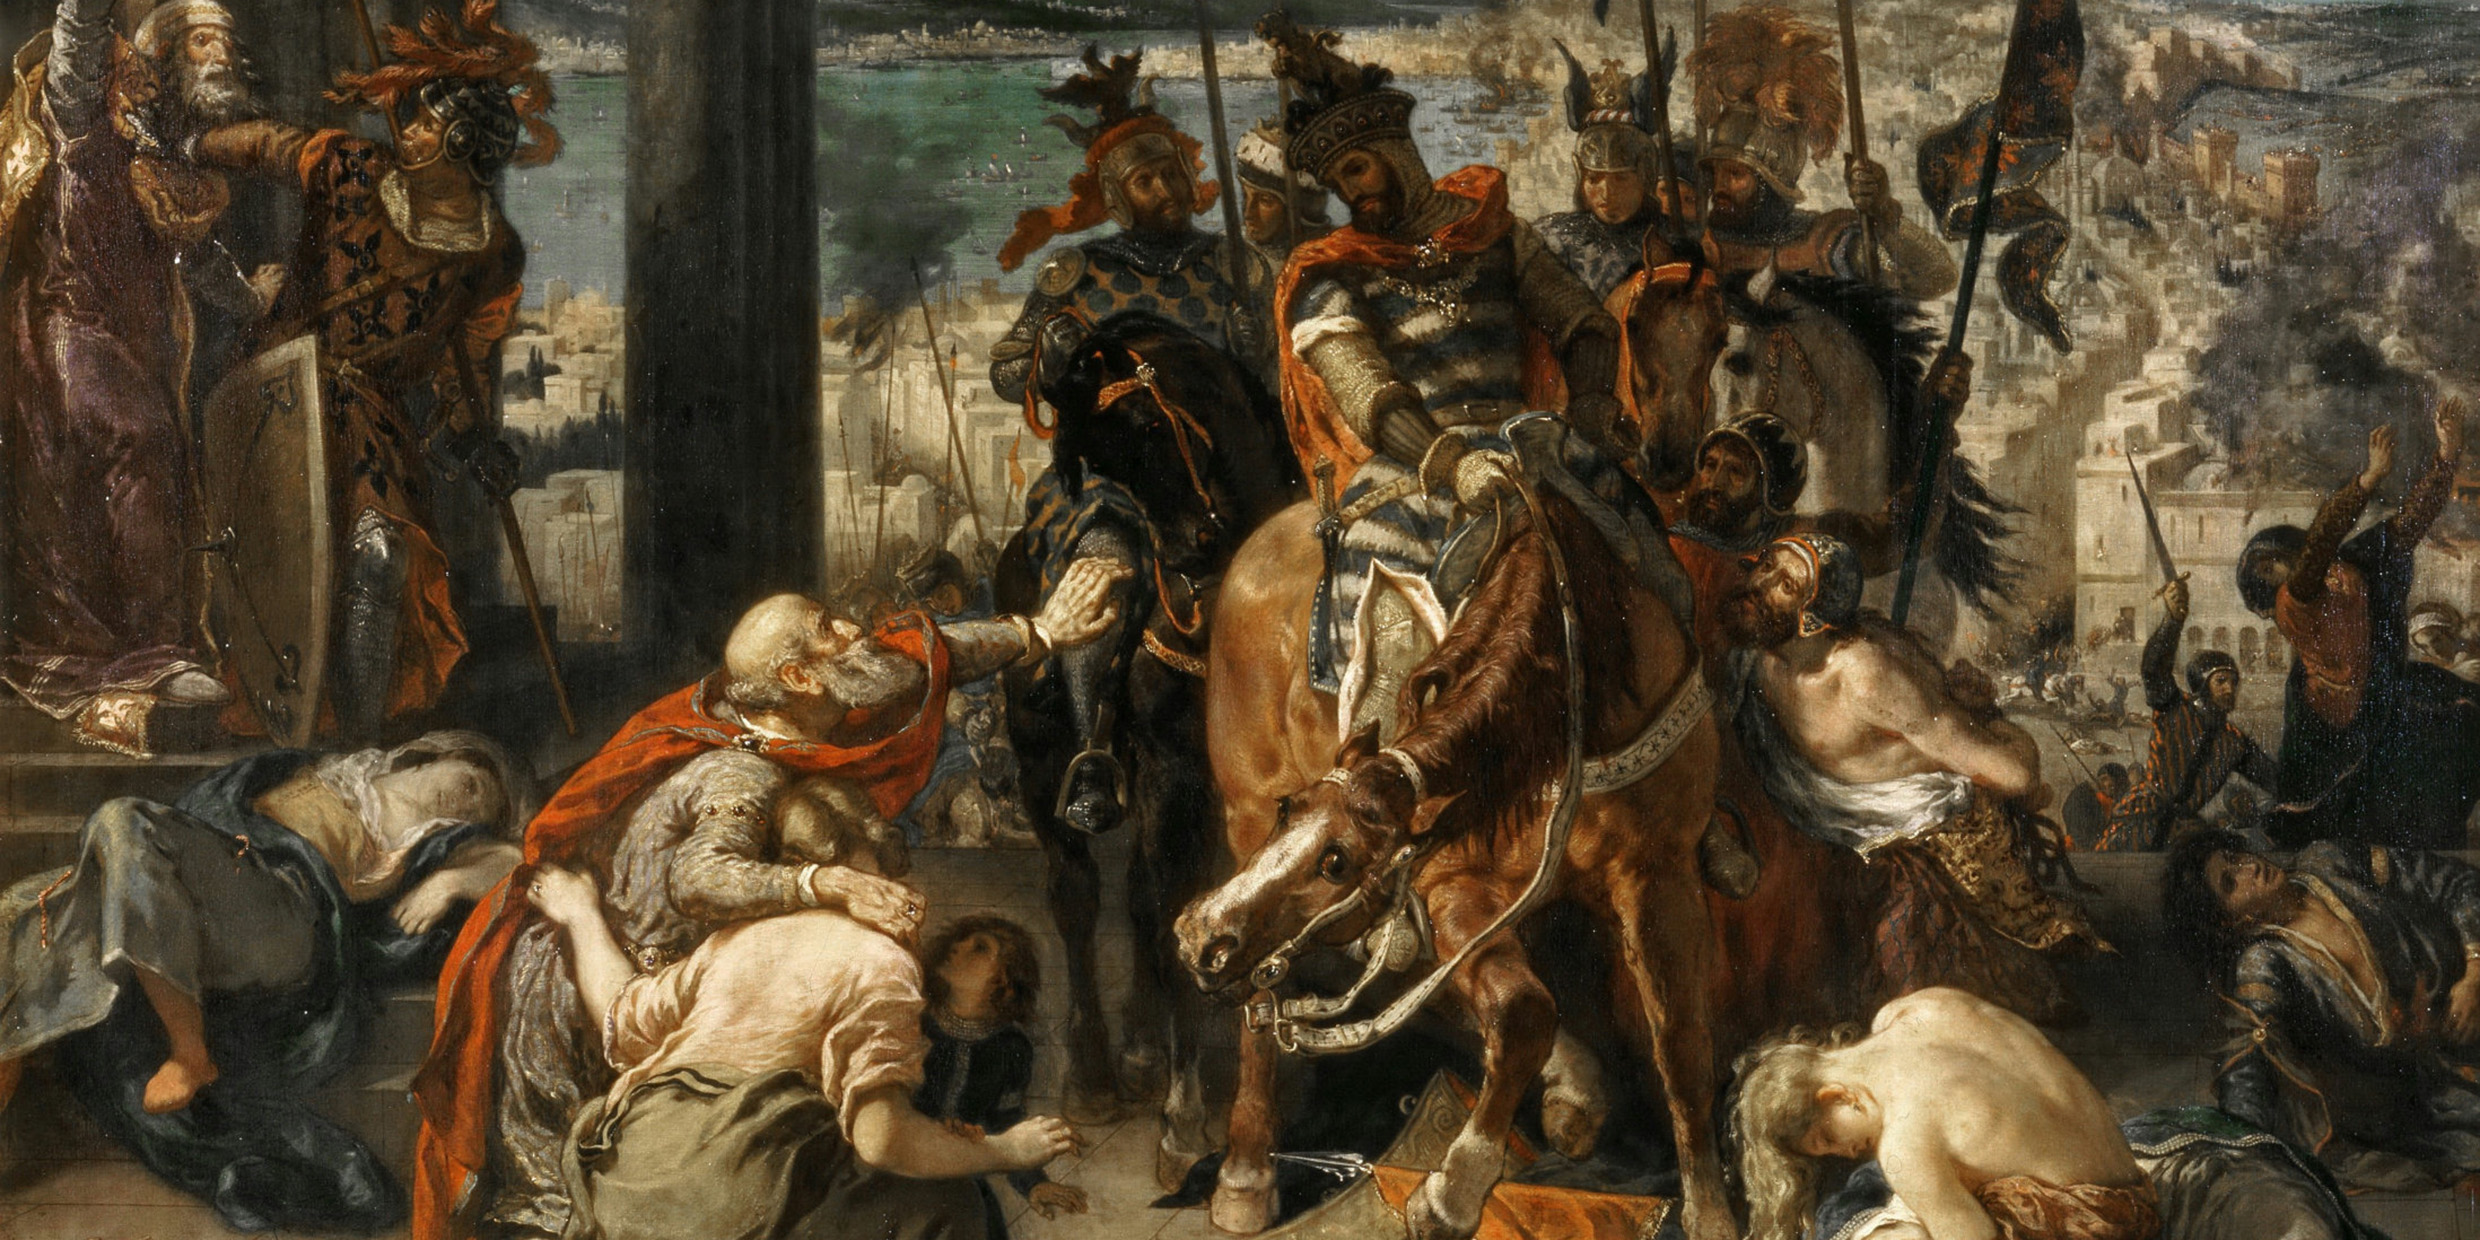 Painting of crusaders on horseback sacking the city of Constantinople